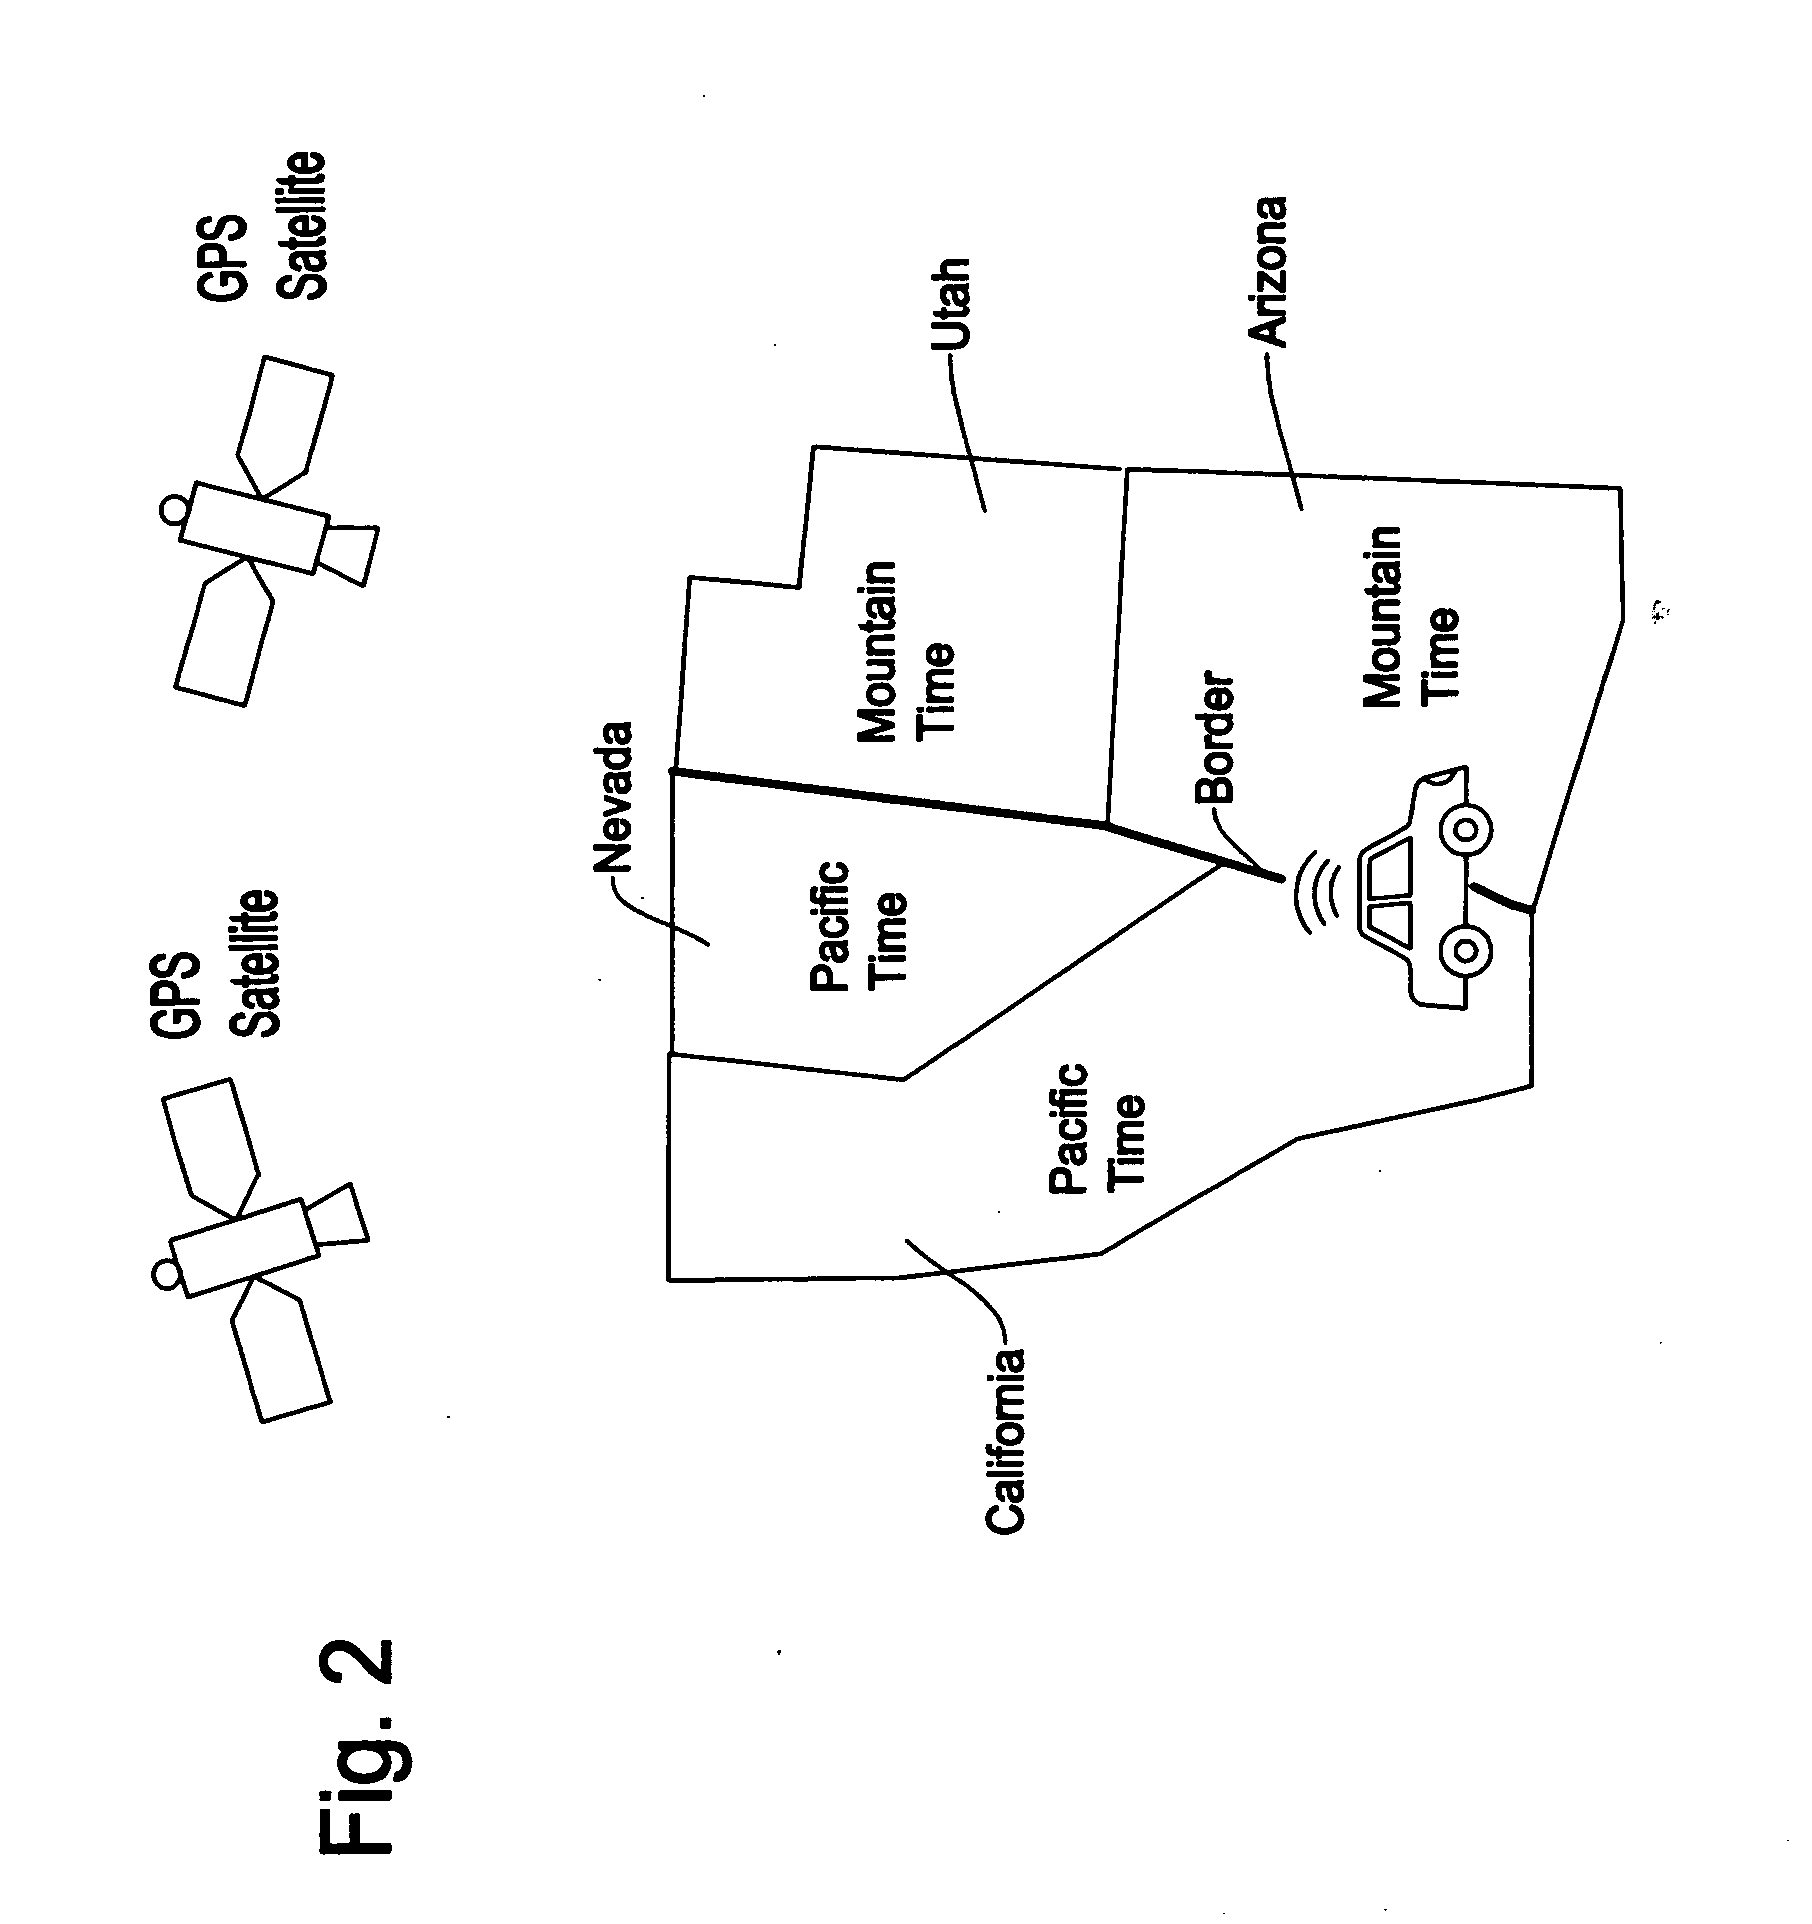 Display method and apparatus for navigation system incorporating time difference at destination